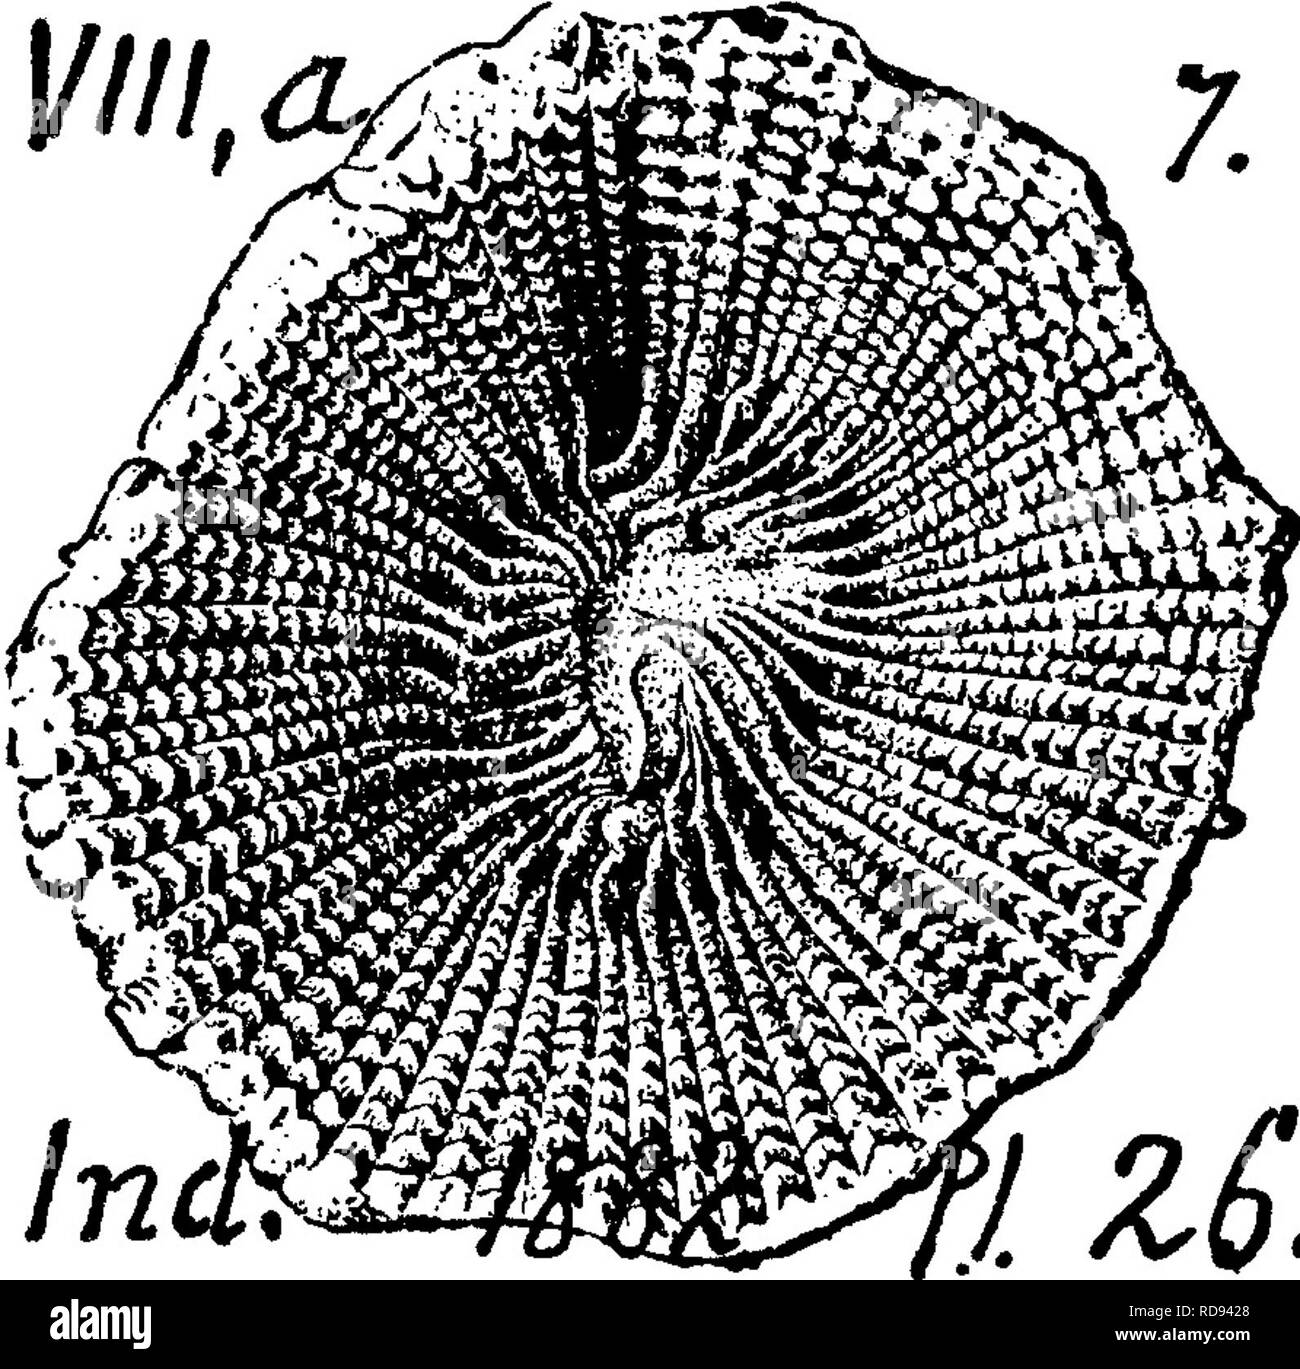 . A dictionary of the fossils of Pennsylvania and neighboring states named in the reports and catalogues of the survey ... Paleontology. Heli. 276 1////,^. Rominger, Foss. Corals, 1876.) CoUett's 1882, p. 311, pi. 23, fig. 9.—Falls of Ohio, and elsewhere. VIII a. Heliophyllum cornulites ? Spec. 601-32 (00, p. 234) seven examples collected by Hale and Hall, 1^ m. S. of Rock Hill furnace, Orbisonia, Hunt. Co., from Low. Held. VI Heliophyllum denticulatum. (Hall, 35th An. Rt. N. Y. State Museum, 1882.) Collett's Indi- ana Rt. 1882, page 313, plate 26, fig. 7, the cup (calyx) of the coral.—Cornif- Stock Photo